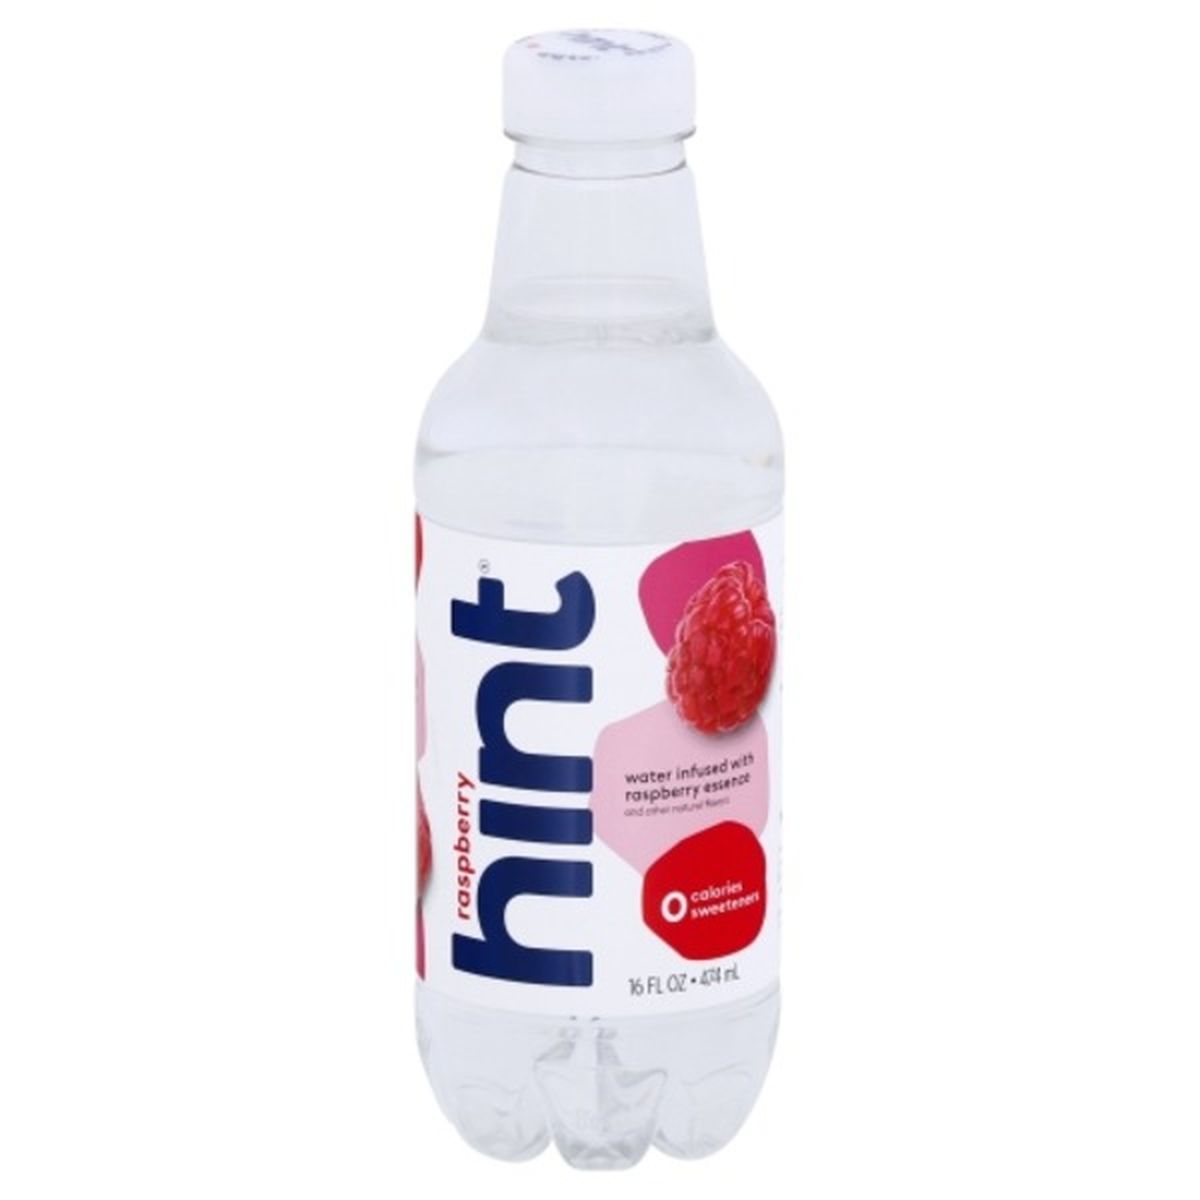 Calories in hint Water, Raspberry